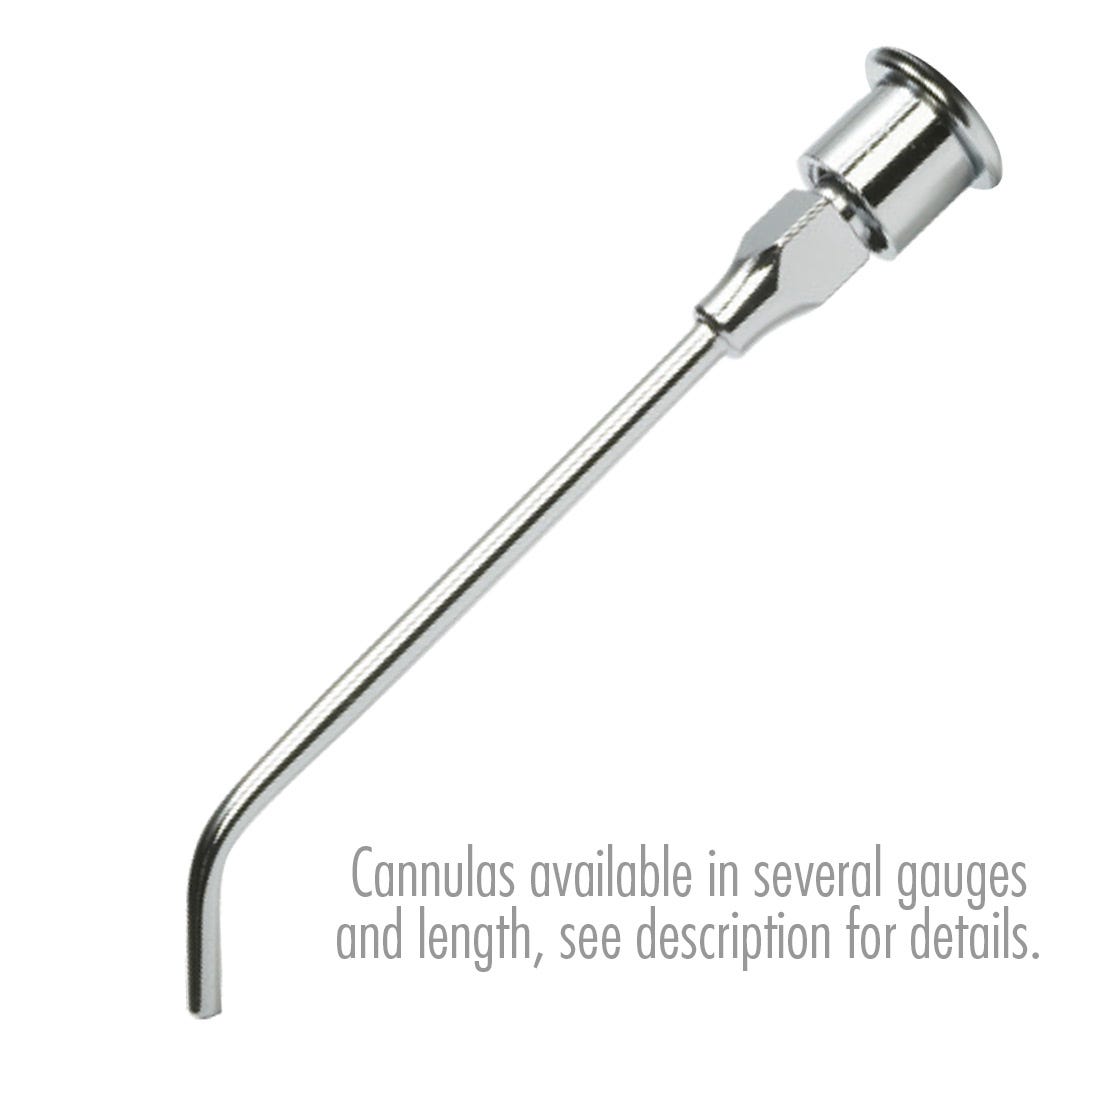 ACE Irrigation Cannula - Stainless Steel 20G x 1-1/4", 45 degree angle